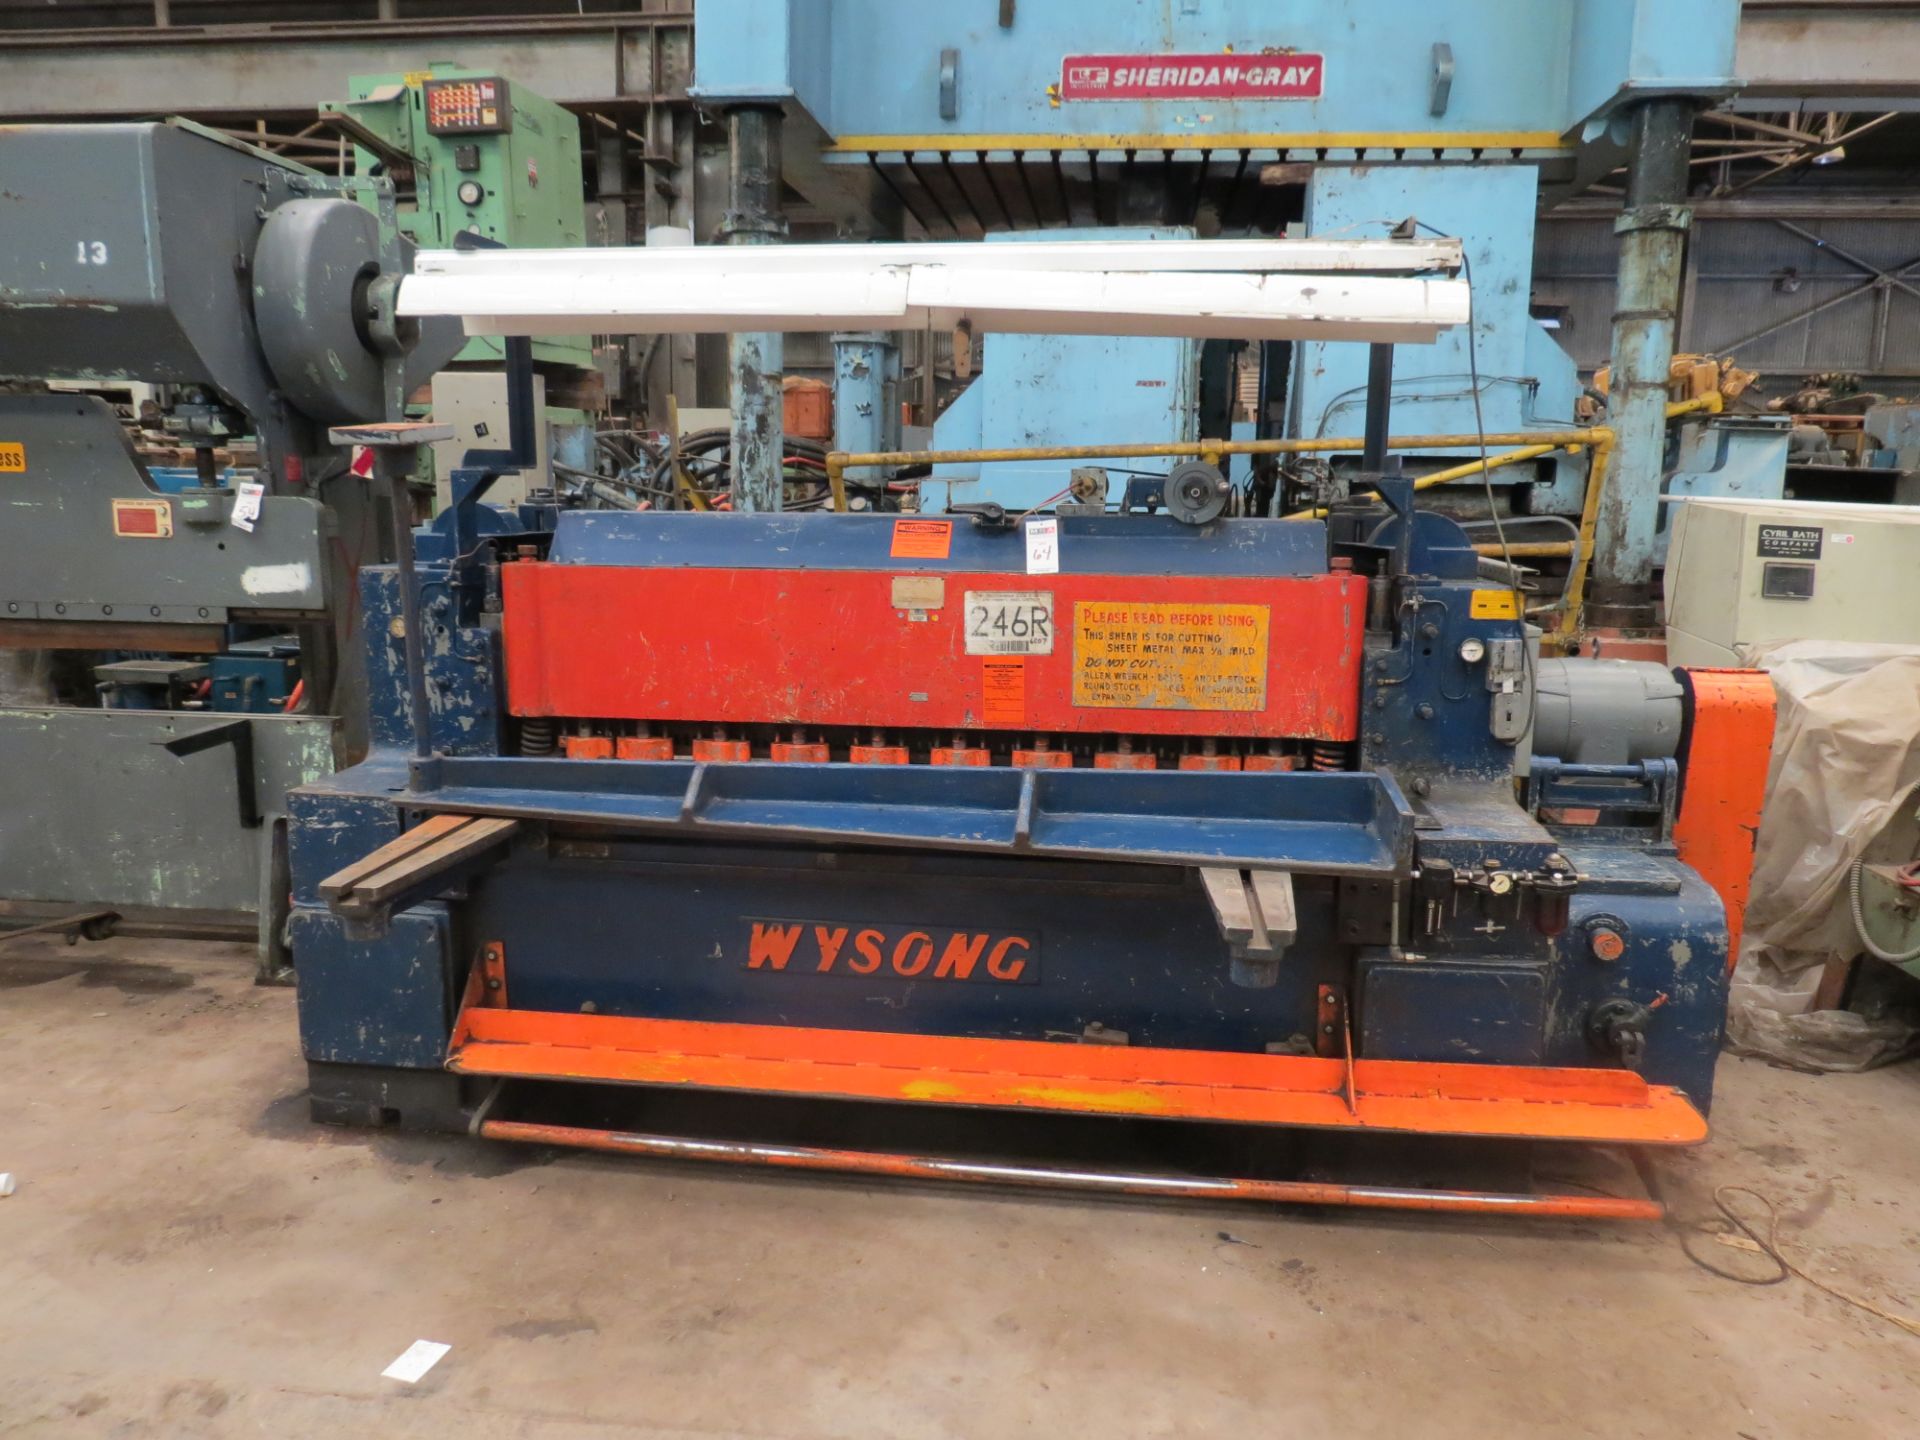 Wysong 1/4 6 FT Mechanical Shear W/ Back Gages Model Number 635